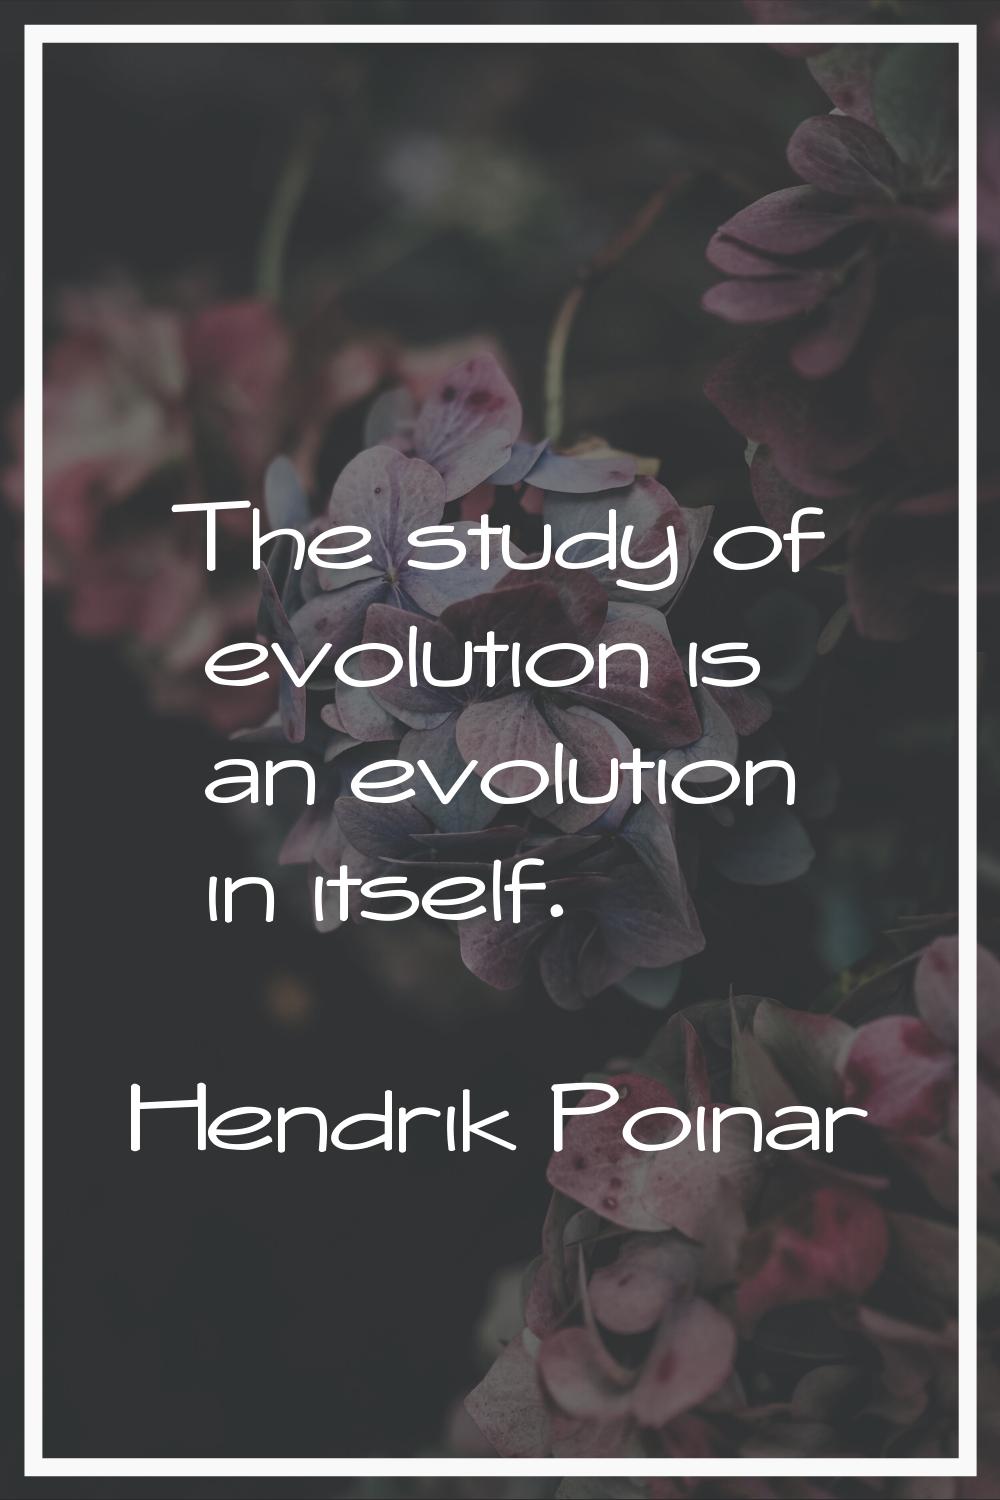 The study of evolution is an evolution in itself.